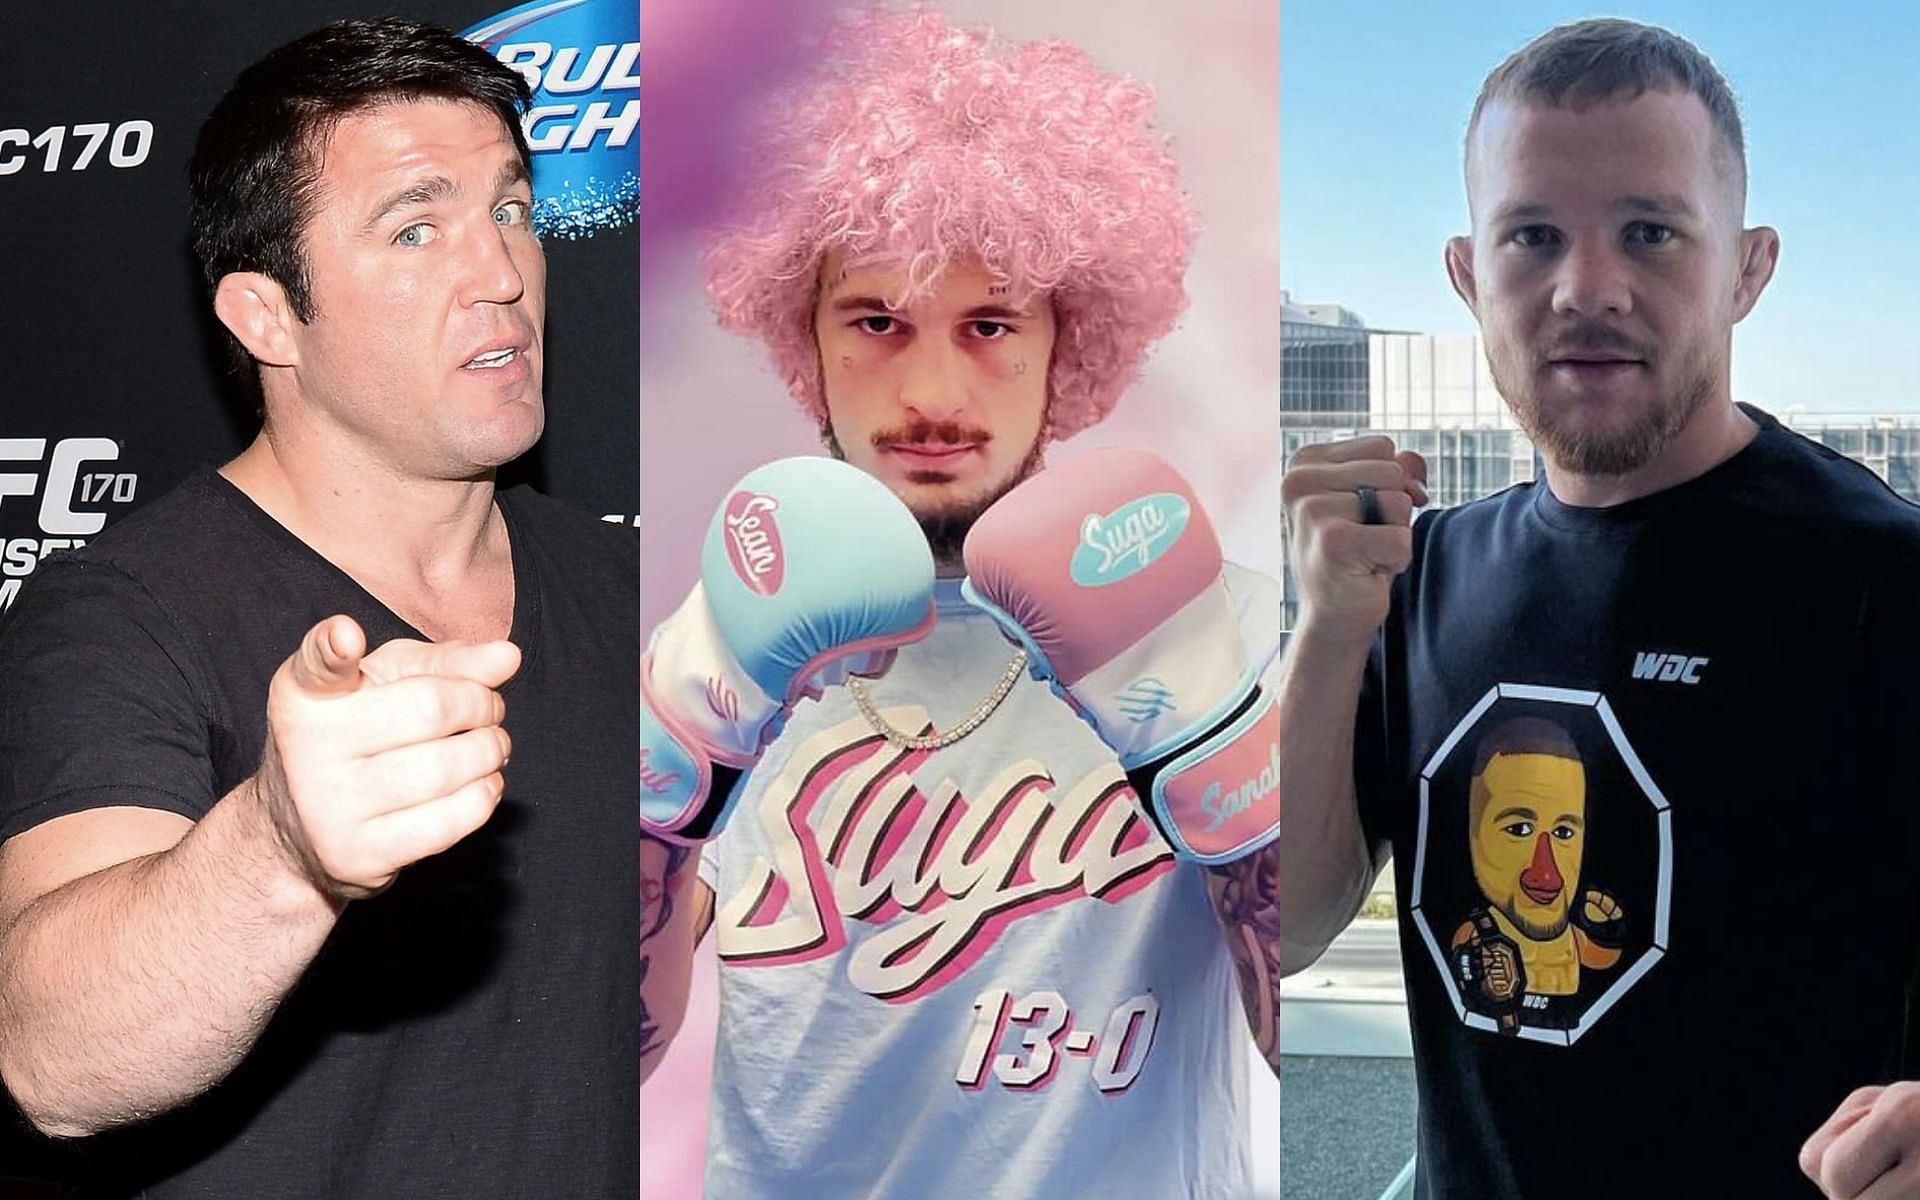 Chael Sonnen (left), Sean O&#039;Malley (center), and Petr Yan (Right) (Images via @sugaseanmma and @petr_yan on Instagram)